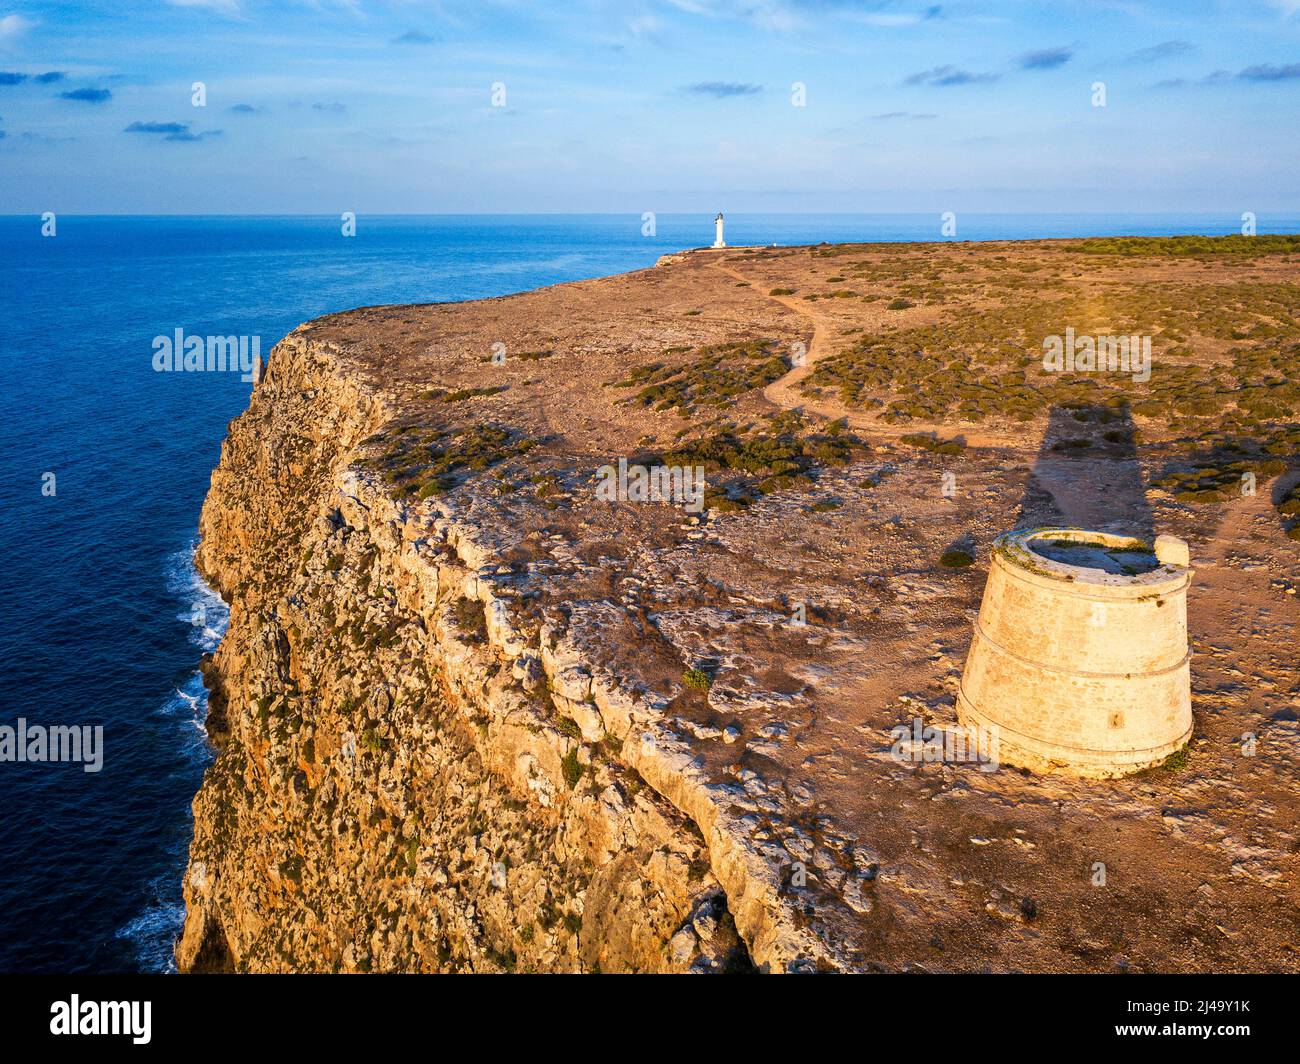 Aerial view of Cap de Barbaria lighthouse and The tower of Es Garroveret Cabo de Berbería, Formentera, Pitiuses, Pityusic Islands, Balearic Islands, M Stock Photo